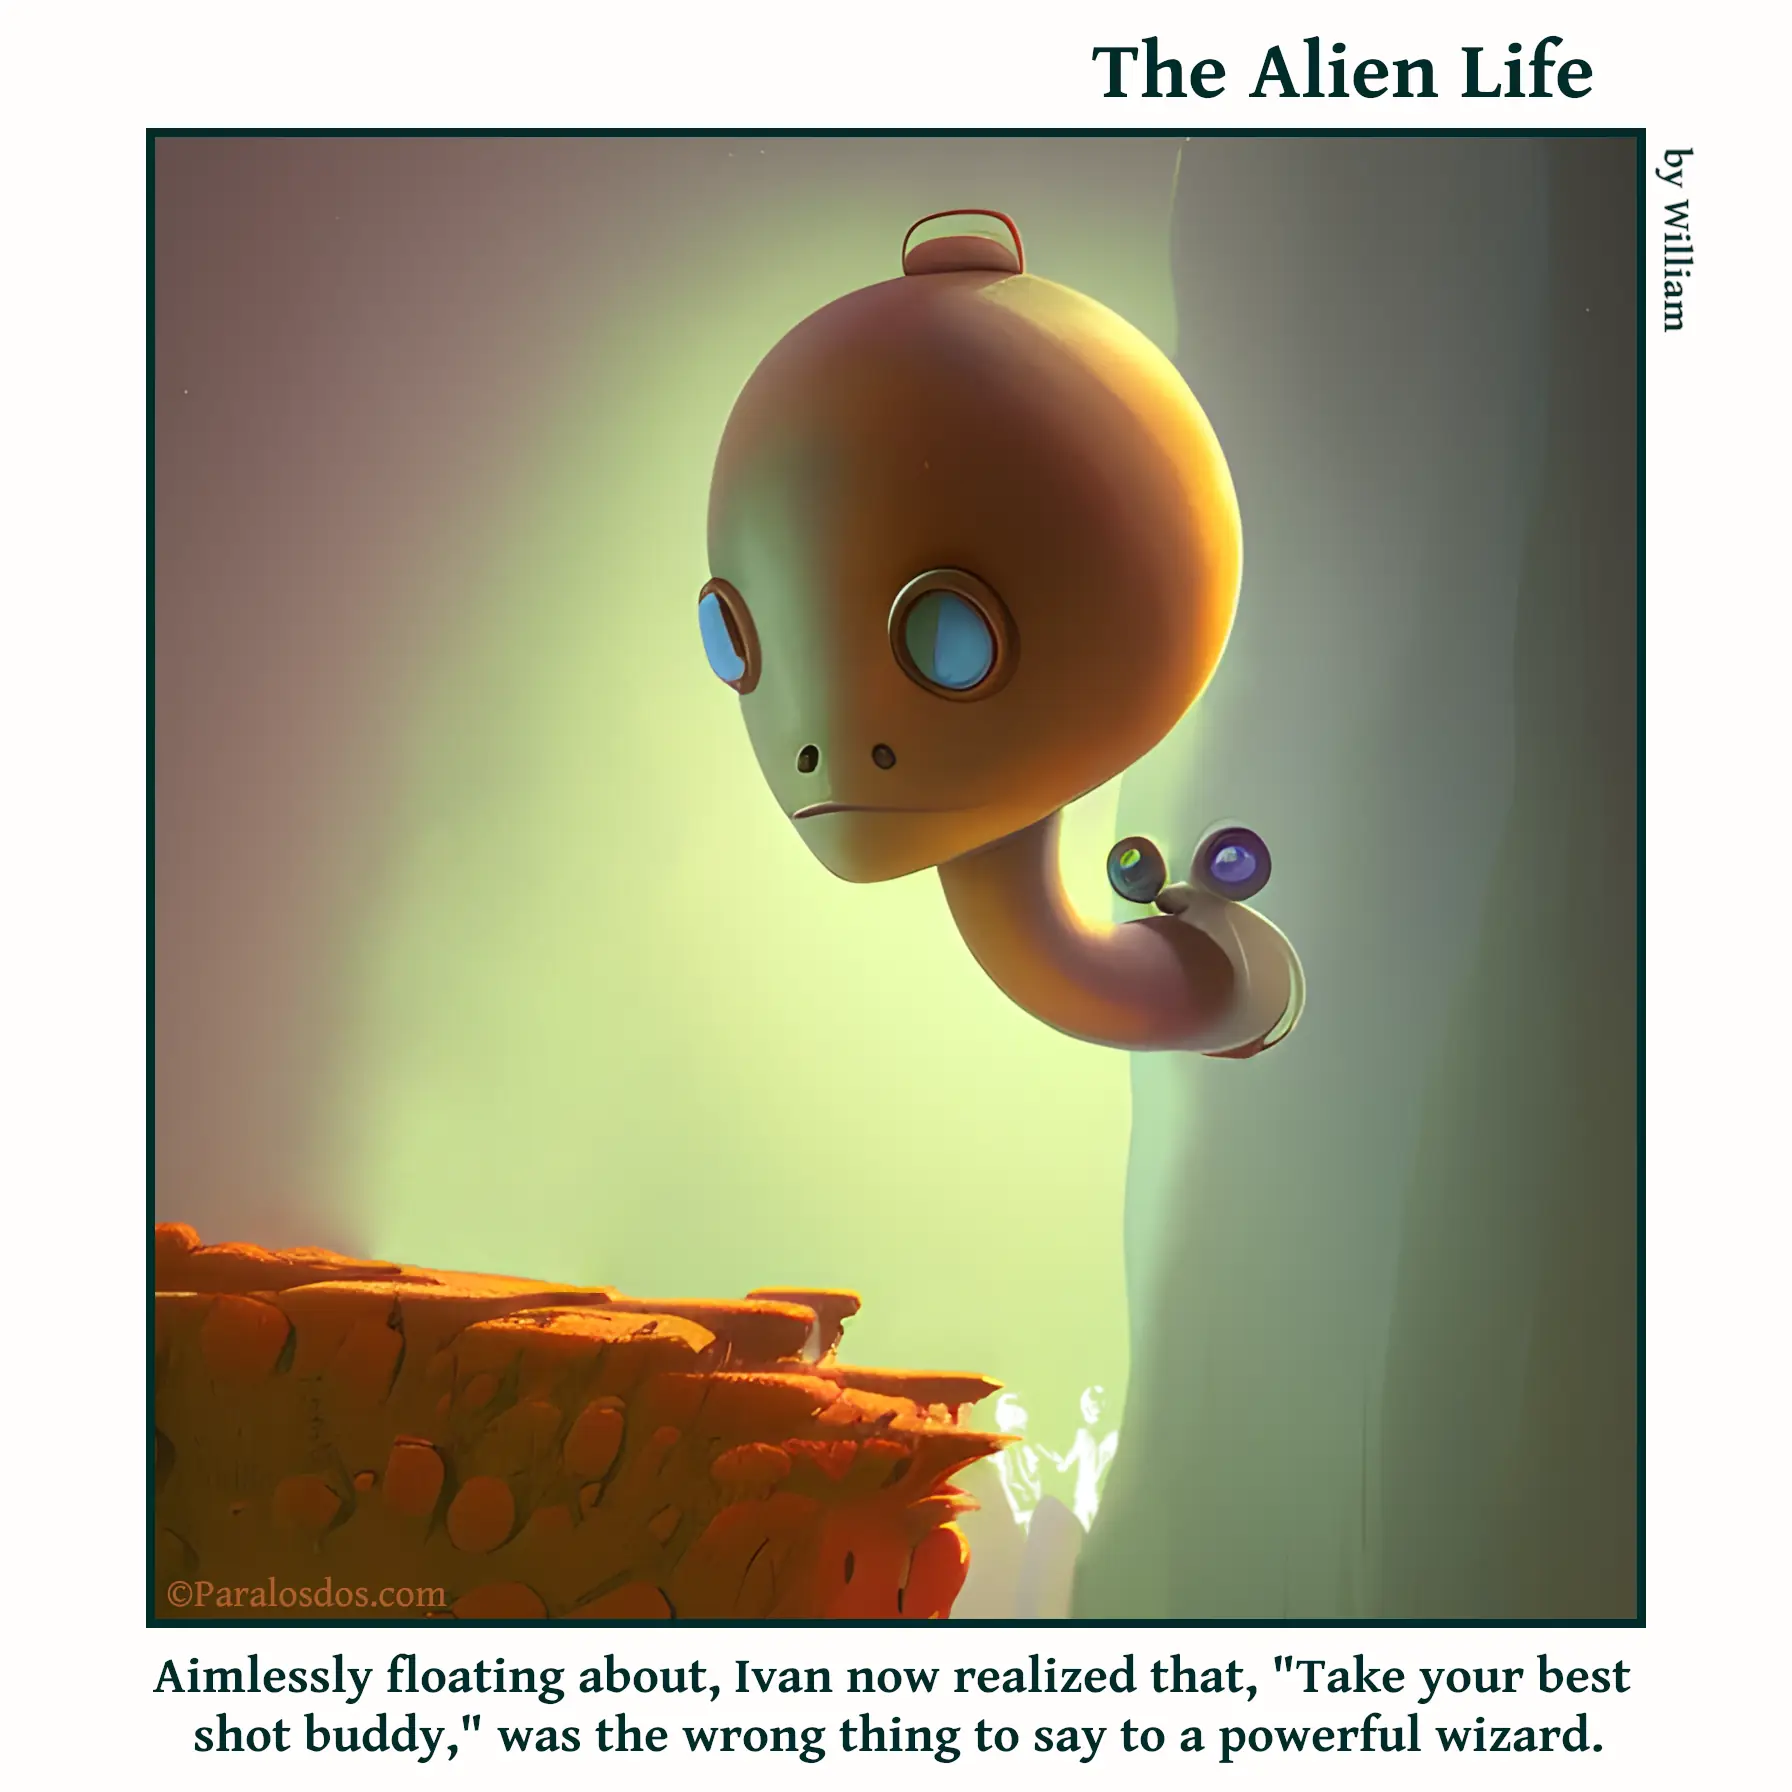 The Alien Life, one panel Comic. An alien that is just a head and a neck is floating in the mountains. The caption reads: Aimlessly floating about, Ivan now realized that, "Take your best shot buddy," was the wrong thing to say to a powerful wizard.